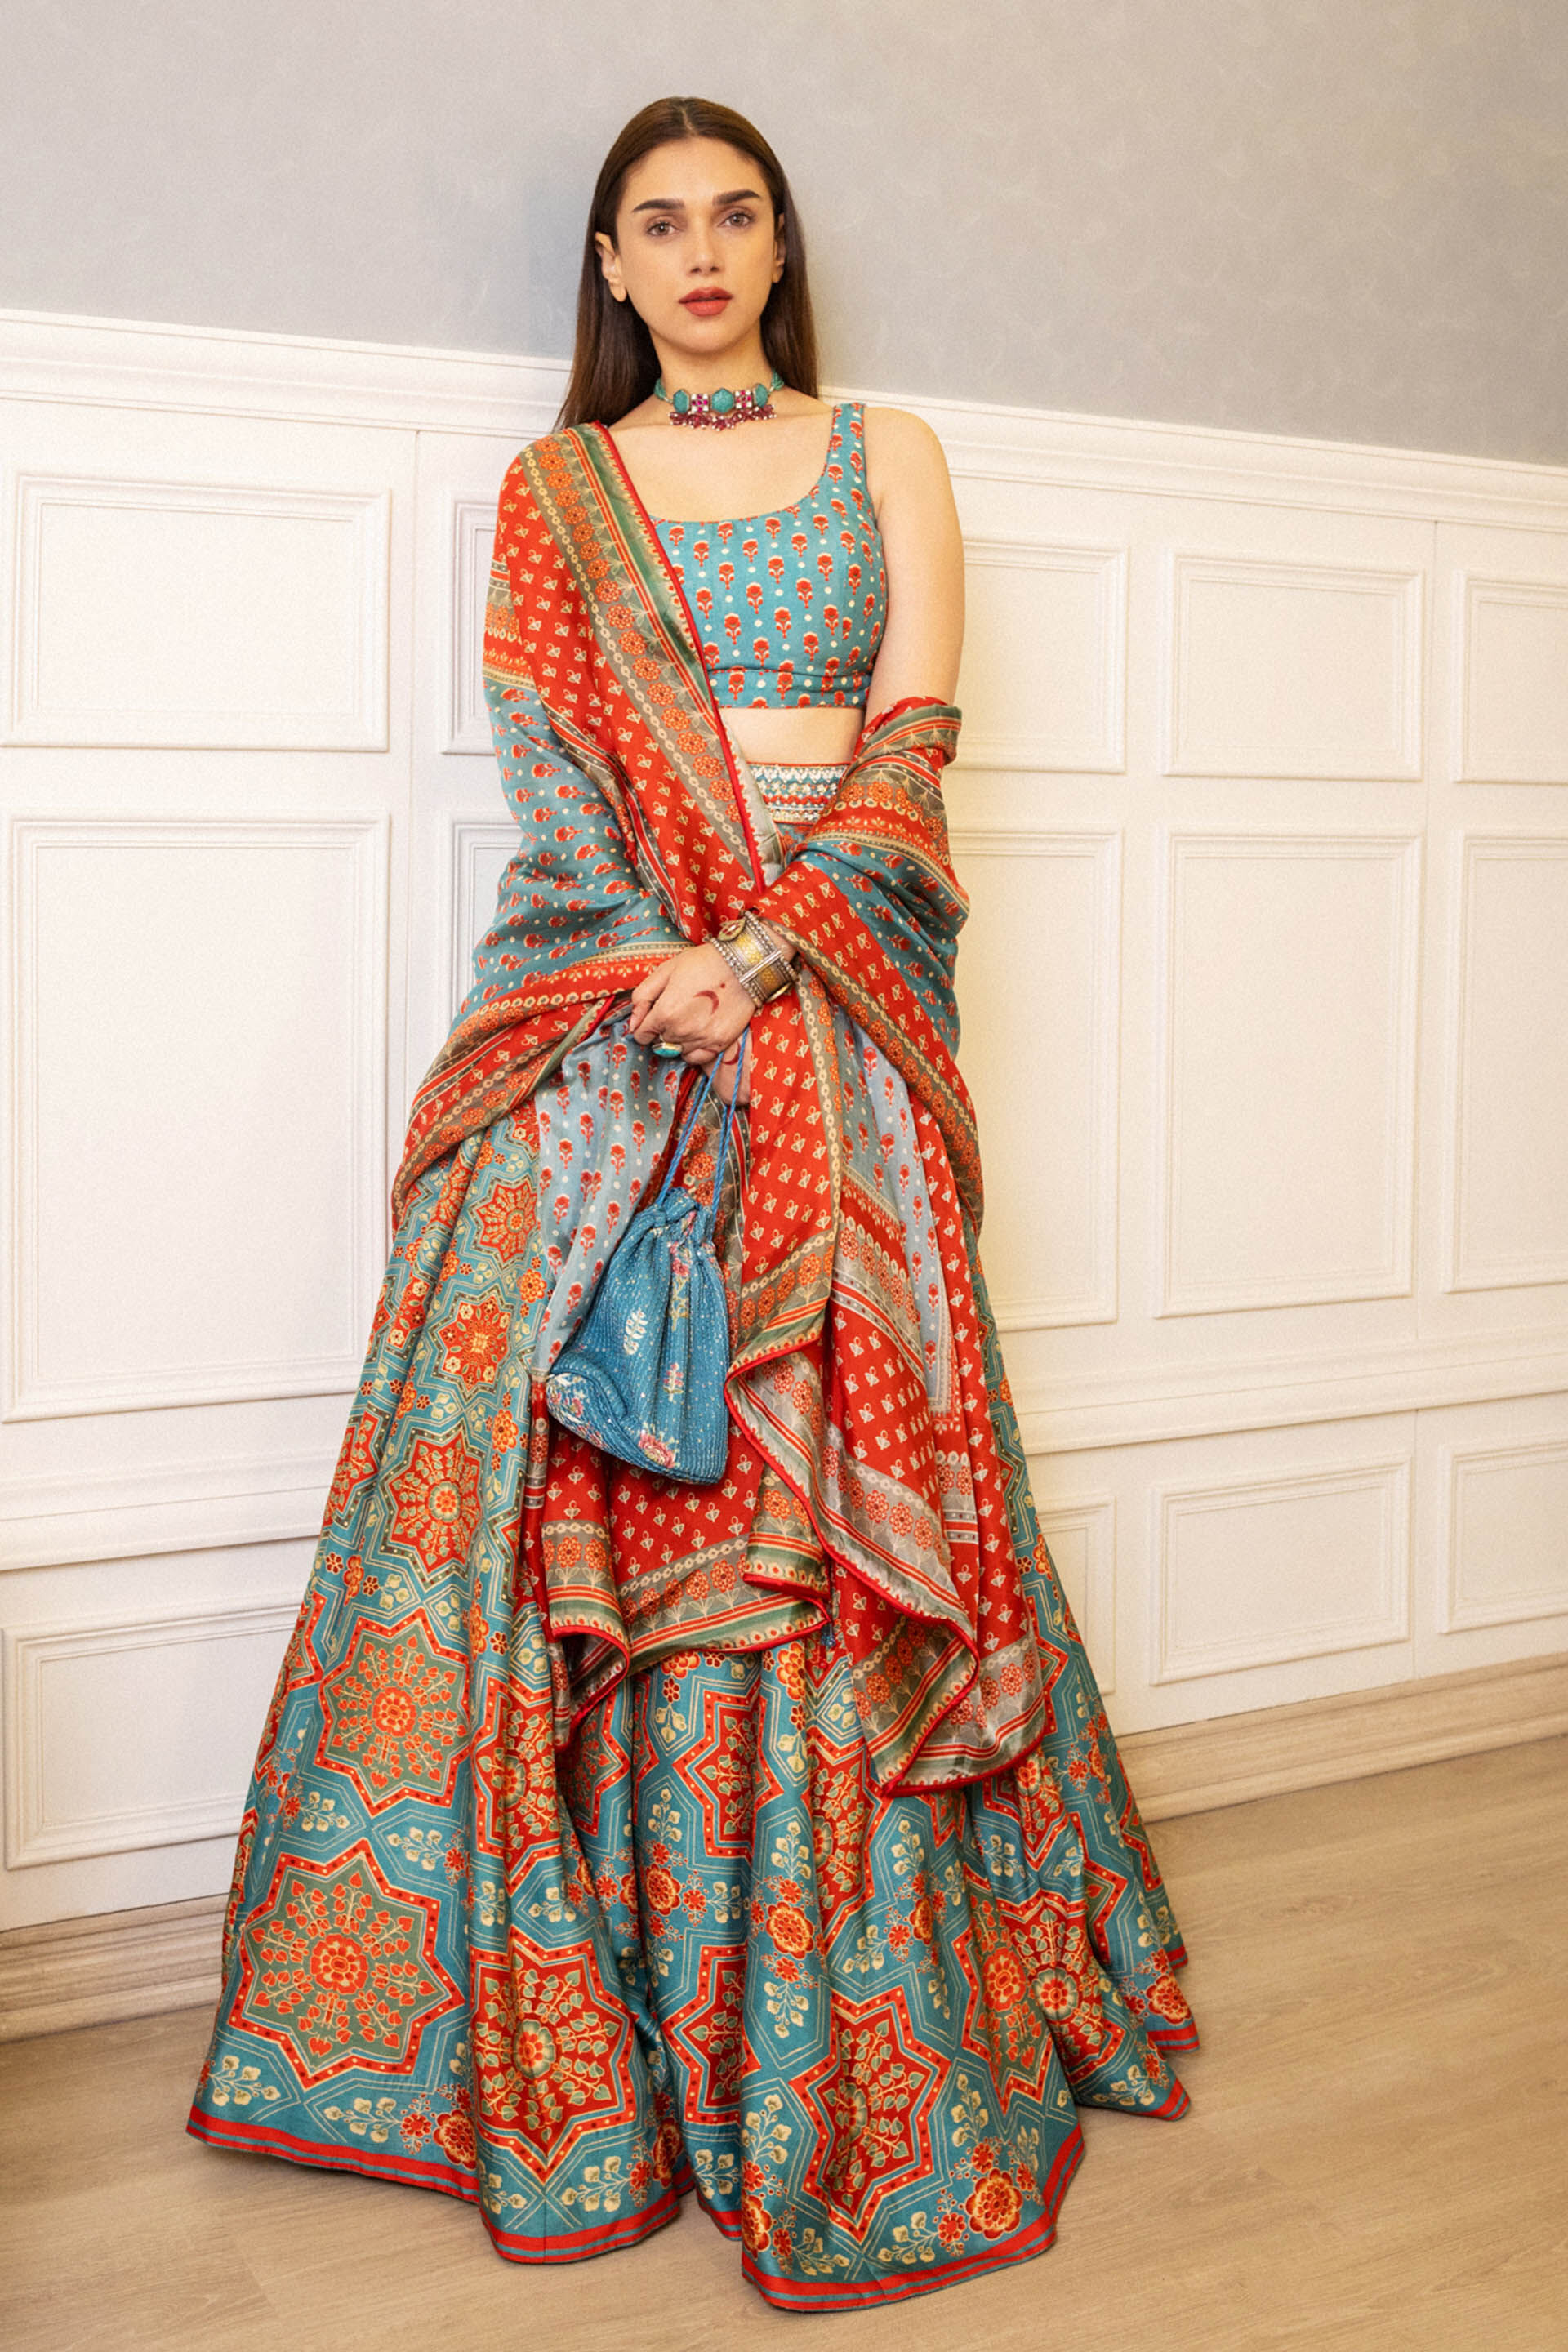 Anita Dongre - The first look of Dolly ki Doli sees Sonam Kapoor in a  lehenga by Anita Dongre. To buy online - http://bit.ly/11H1sMK #gotapatti  #handcrafted #artisanal #MadeInIndia #Grassroot | Facebook